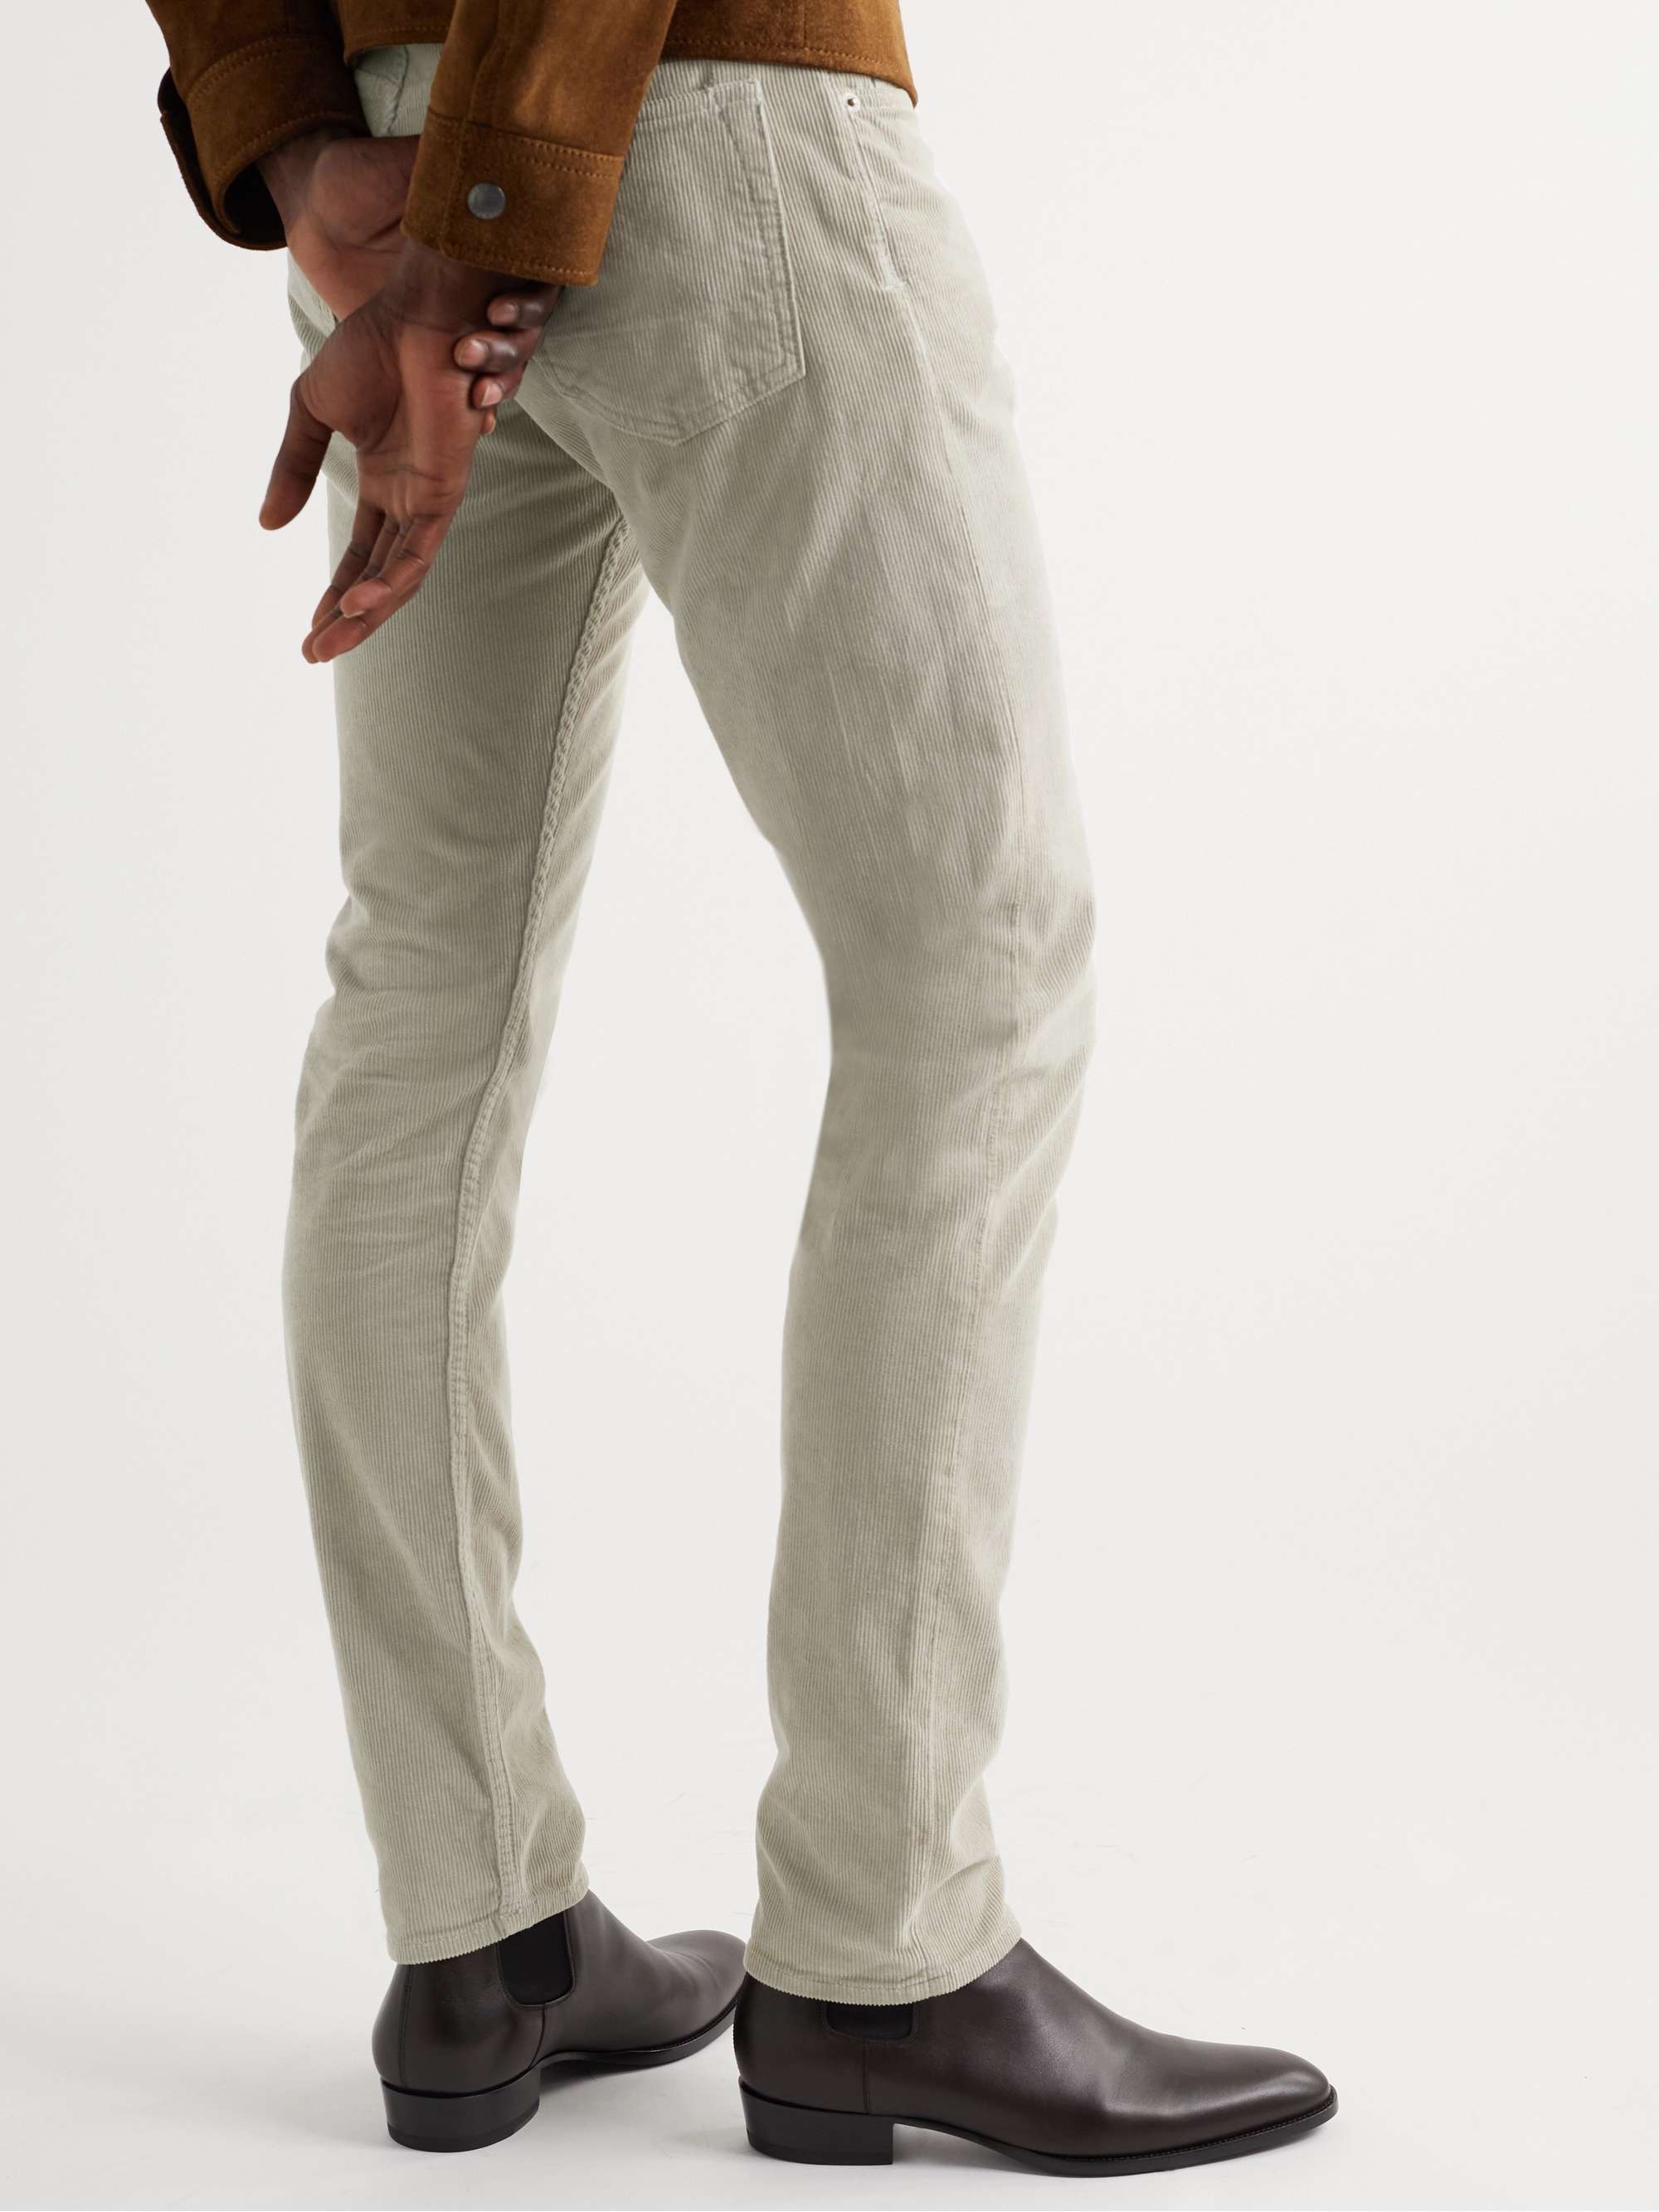 TOM FORD Slim-Fit Garment-Dyed Cotton-Blend Corduroy Trousers